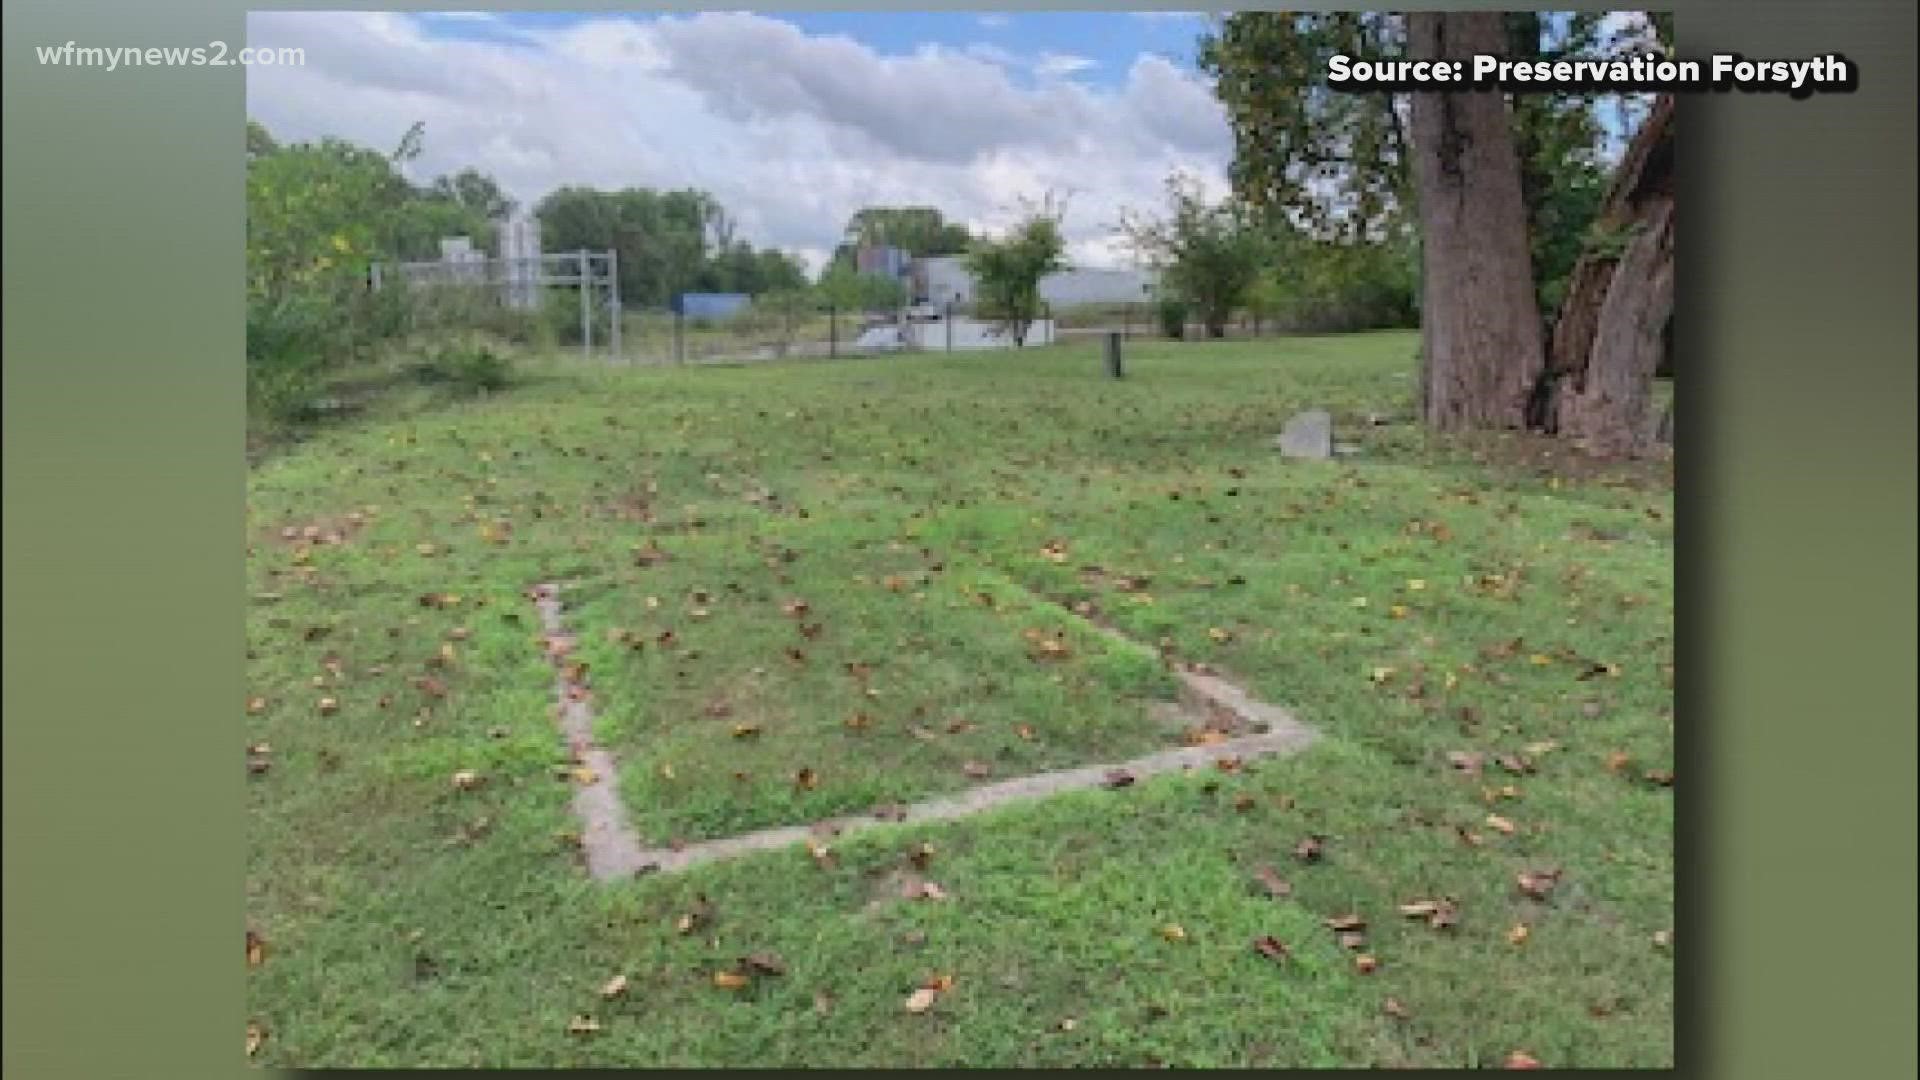 A new documentary called “Unmarked” looks into the restoration needed at Black cemeteries.